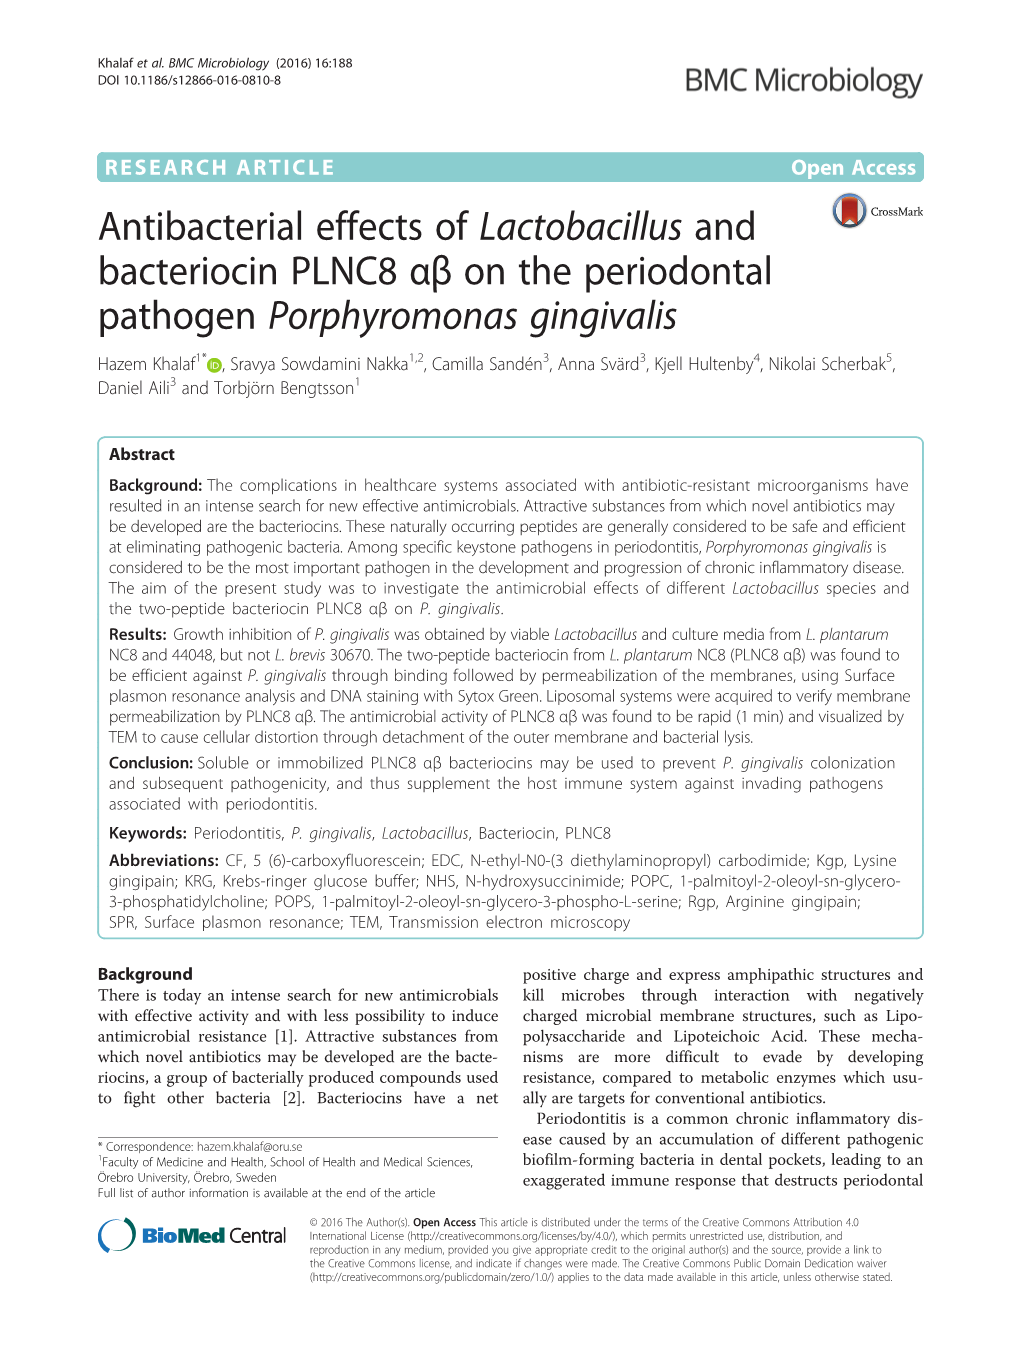 Antibacterial Effects of Lactobacillus and Bacteriocin PLNC8 Αβ on The